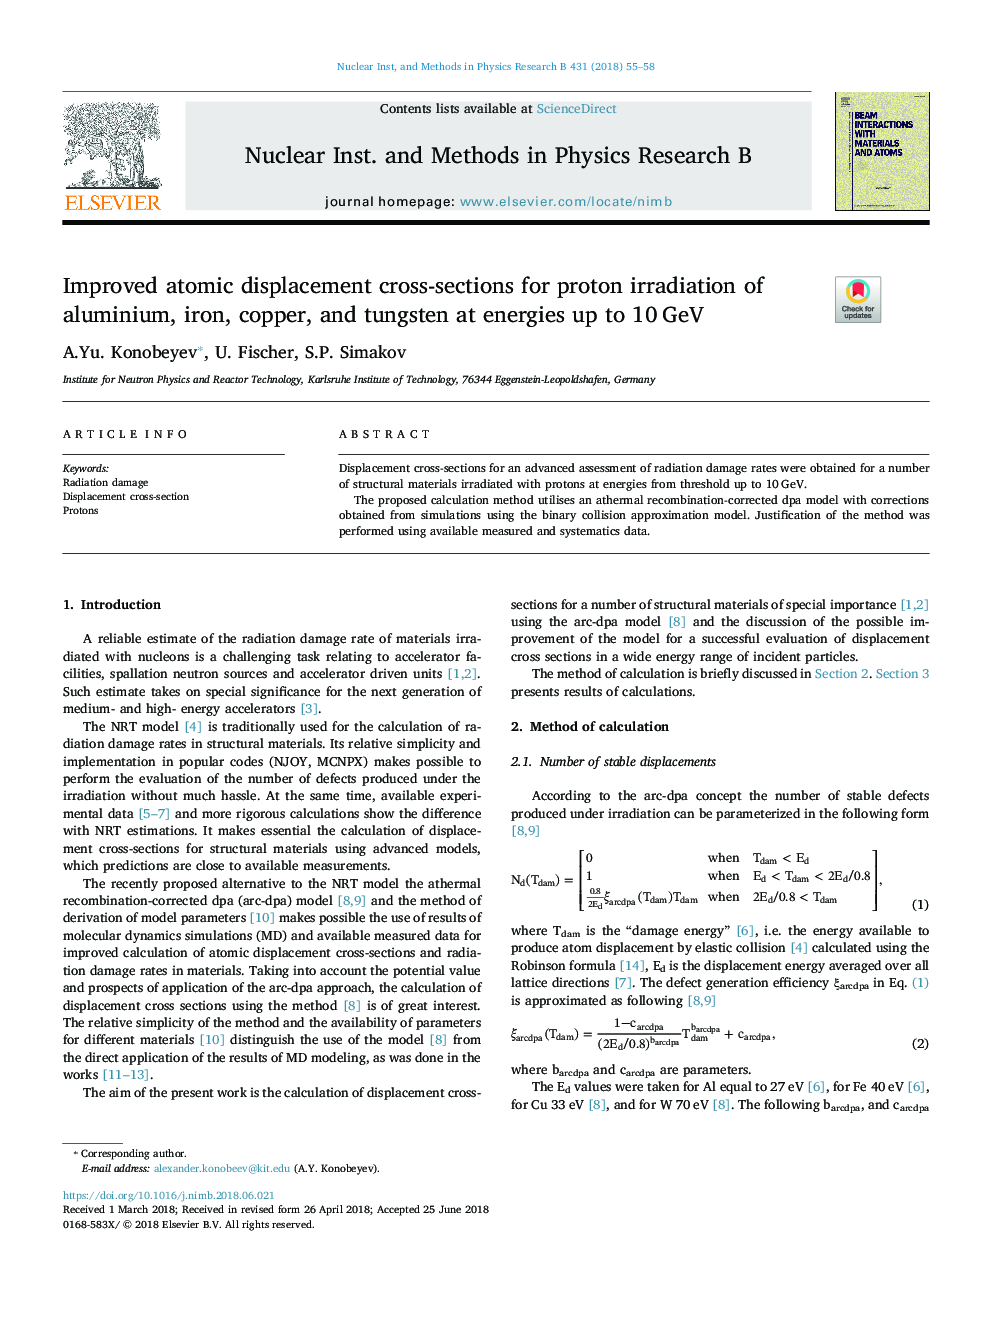 Improved atomic displacement cross-sections for proton irradiation of aluminium, iron, copper, and tungsten at energies up to 10â¯GeV